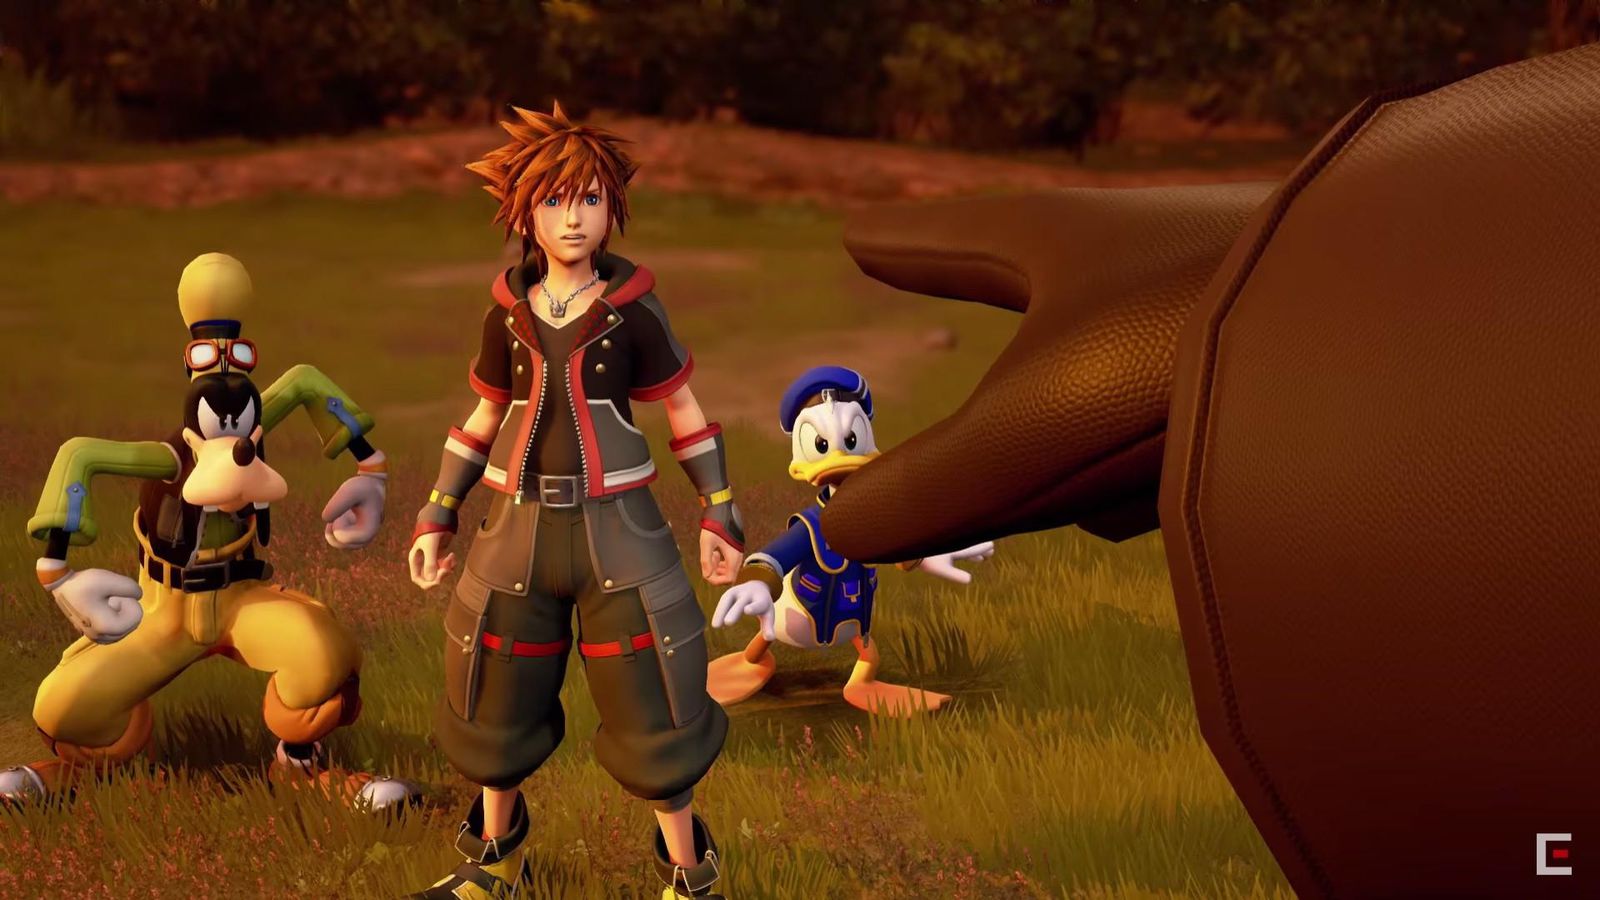 Adventure into the World of Kingdom Hearts 3 When It Sets Sail January 29, 2019